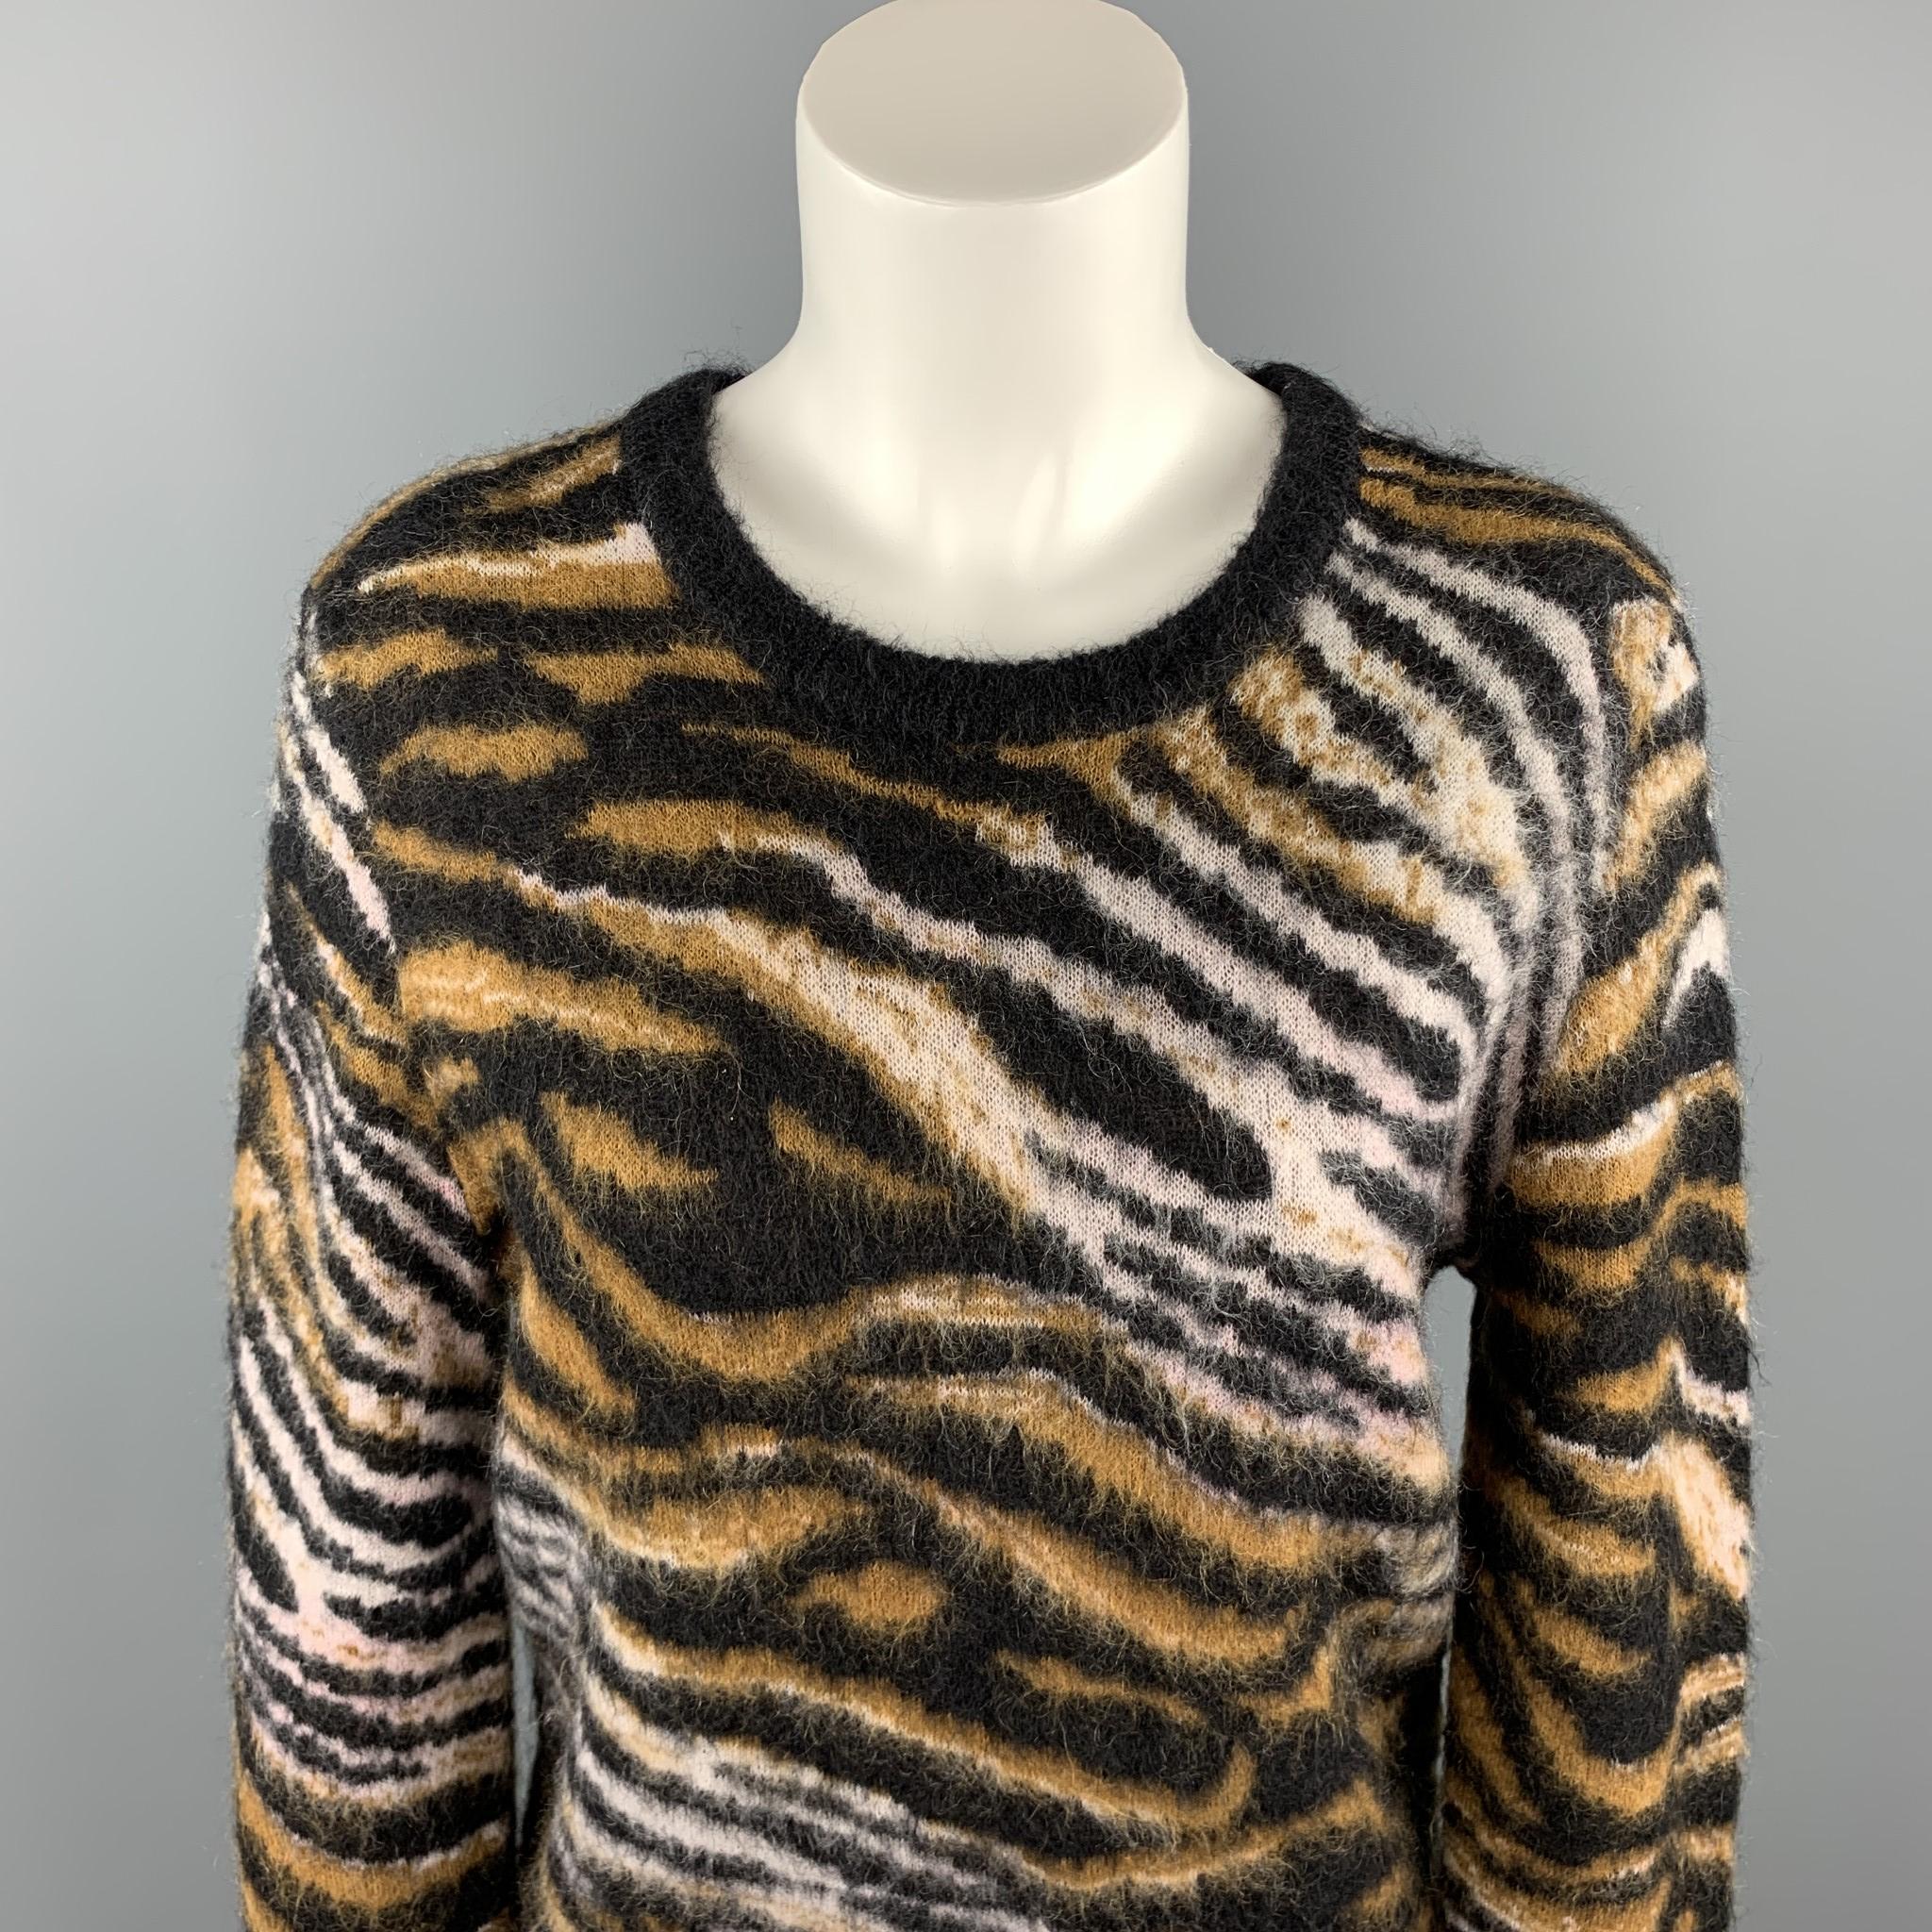 EQUIPMENT FEMME sweater comes in a black & tan tiger print mohair blend featuring a ribbed crew-neck.

Excellent Pre-Owned Condition.
Marked: S/P

Measurements:

Shoulder: 17.5 in. 
Bust: 38 in. 
Sleeve: 28.5 in. 
Length: 21 in. 